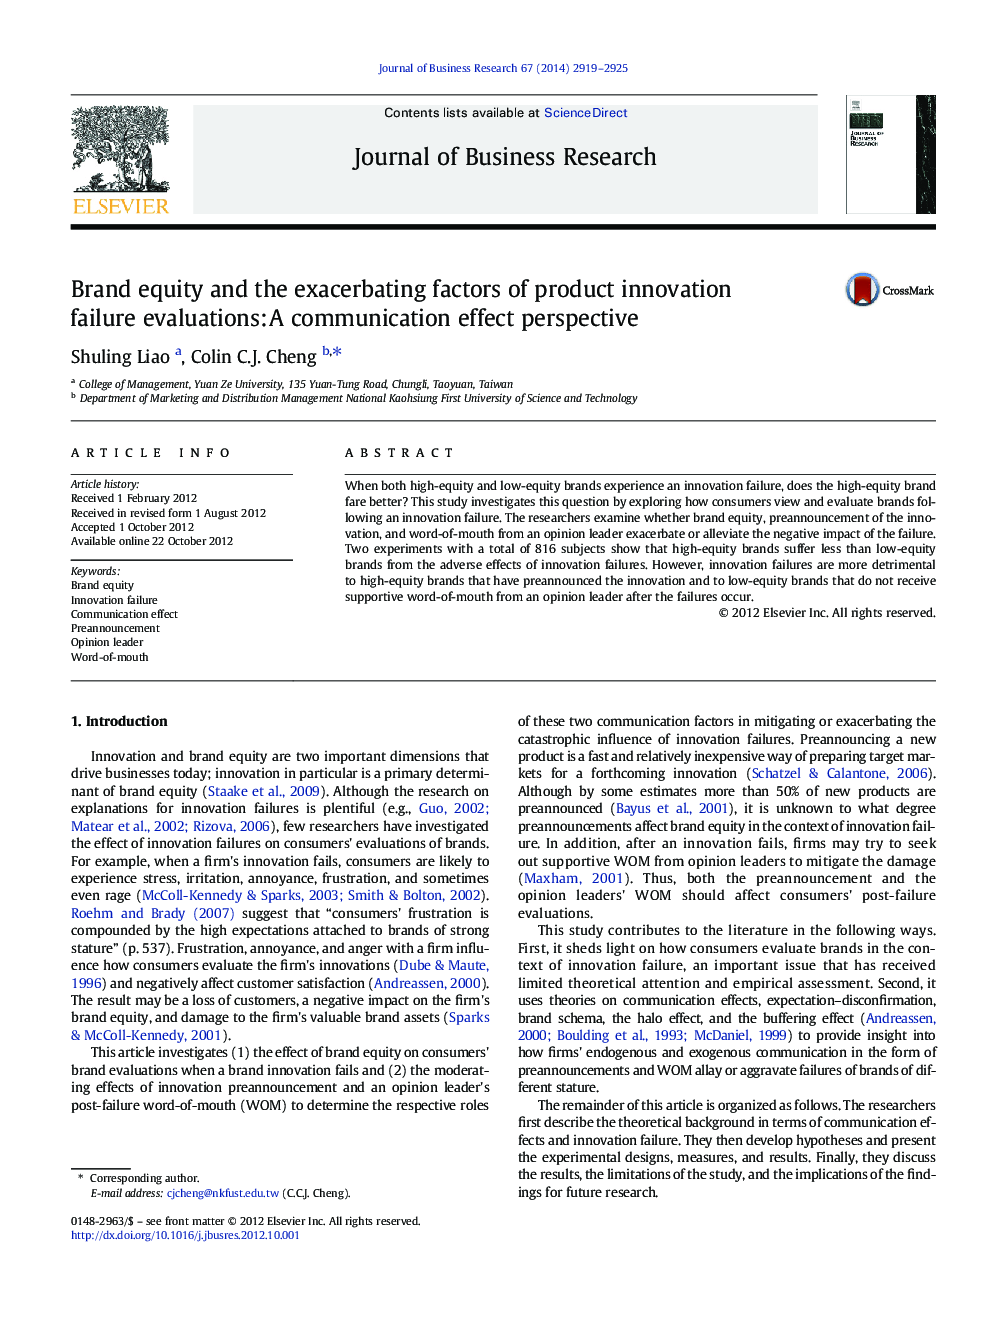 Brand equity and the exacerbating factors of product innovation failure evaluations: A communication effect perspective